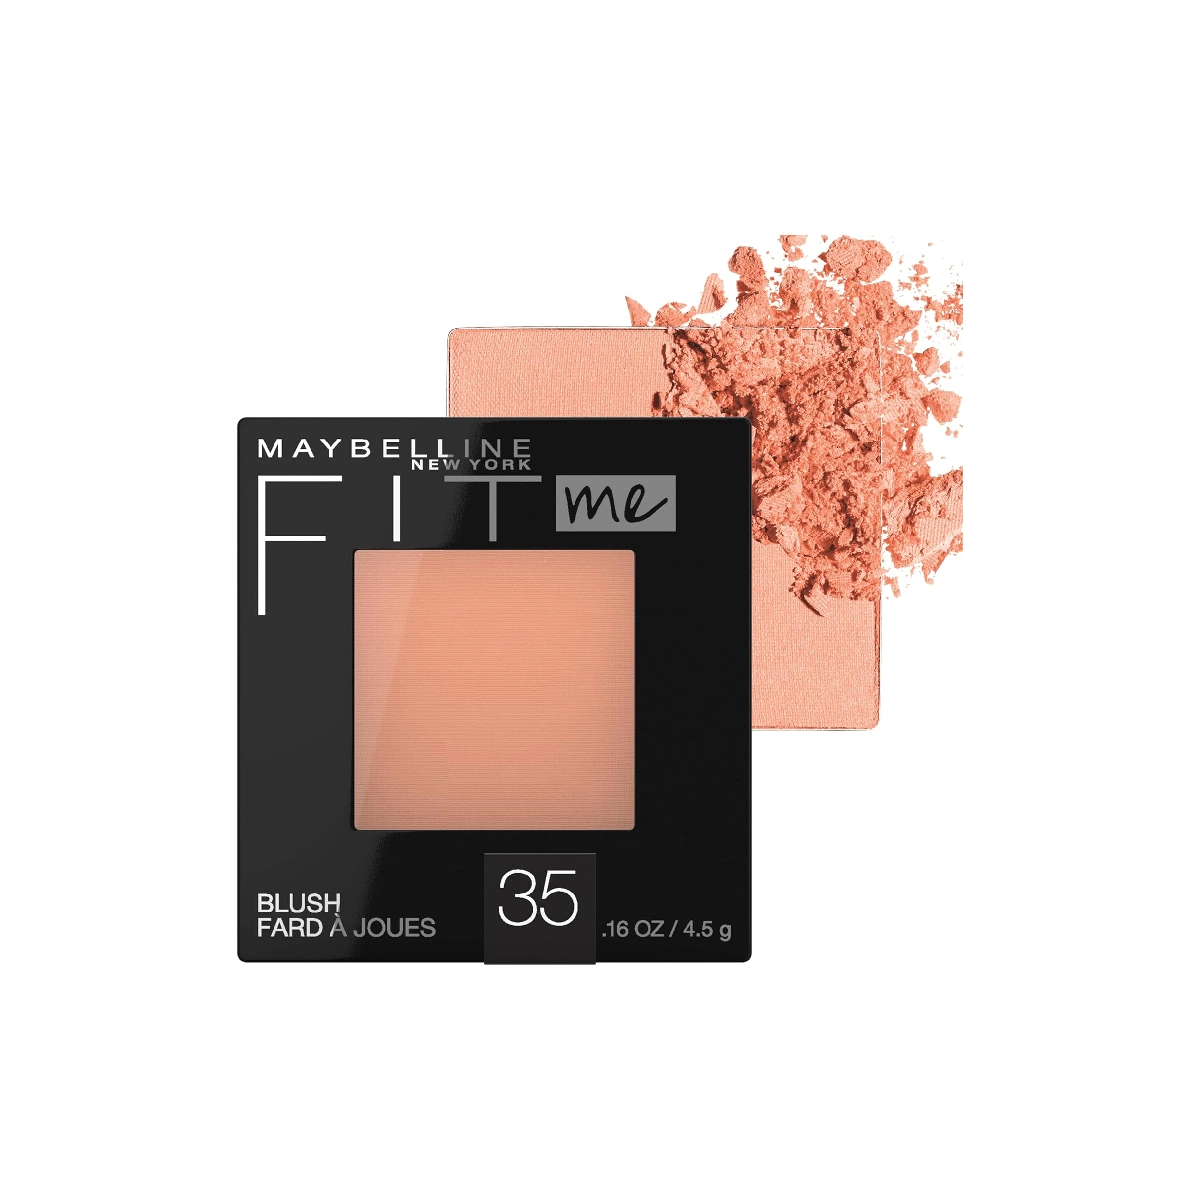 Maybelline Fit Me Blush - blush compact against a white background